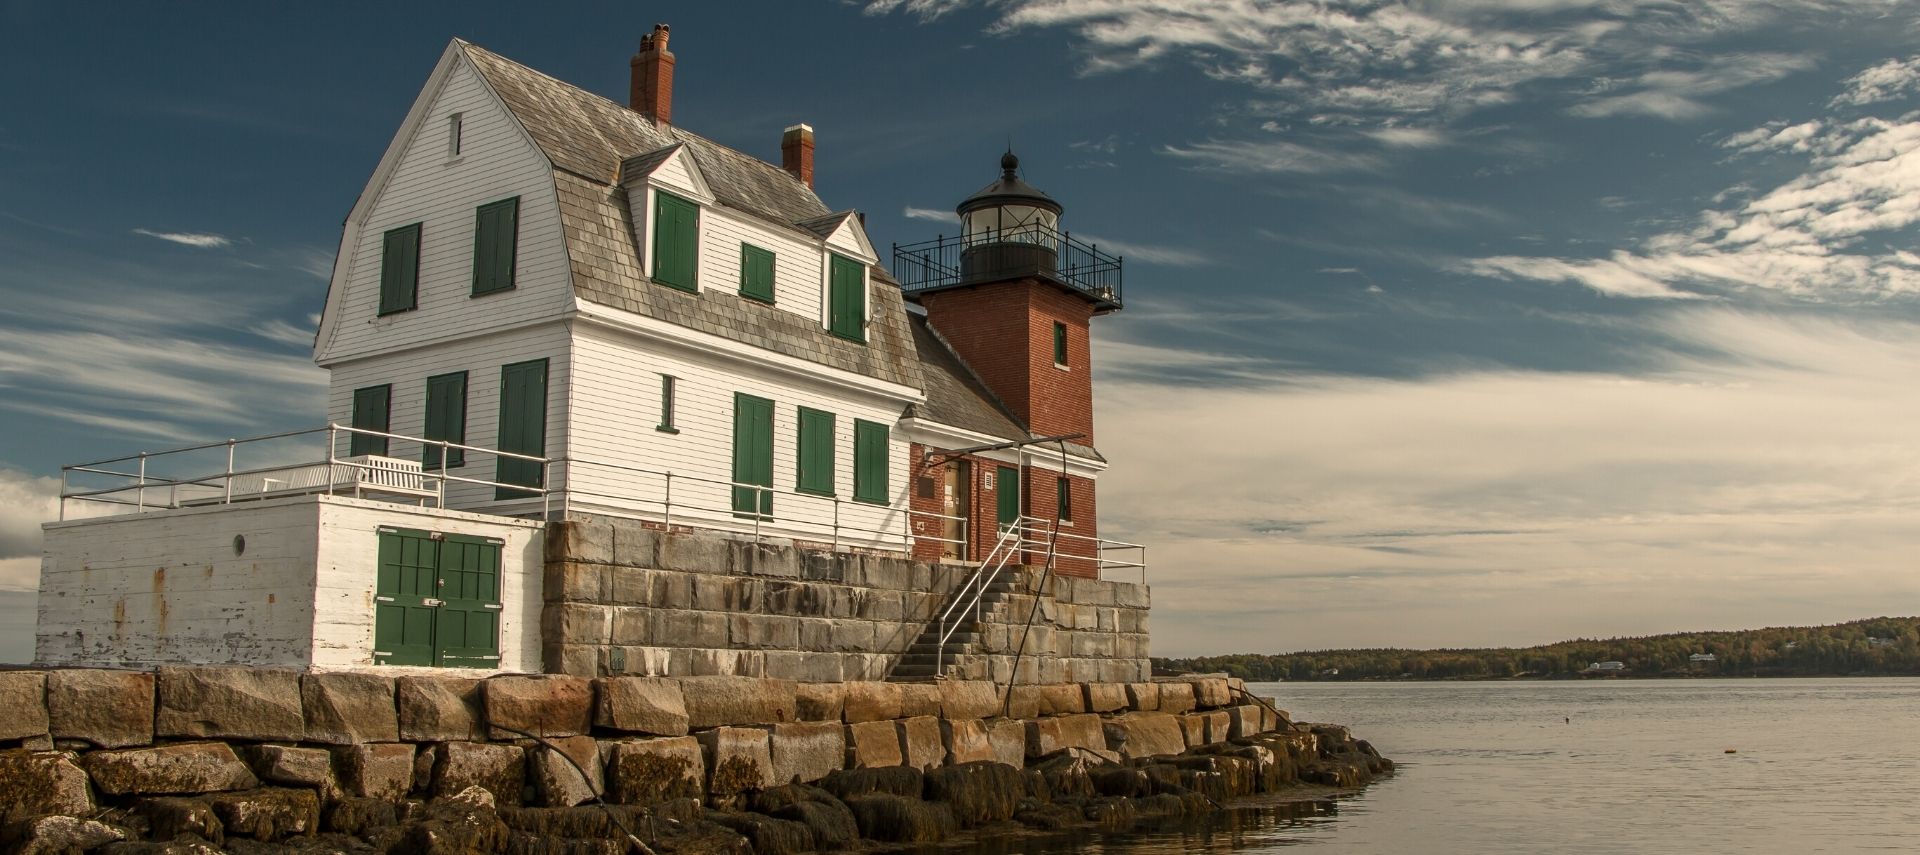 Beautiful red lighthouse with attached two-story white house on a rocky outcropping overlooking the water